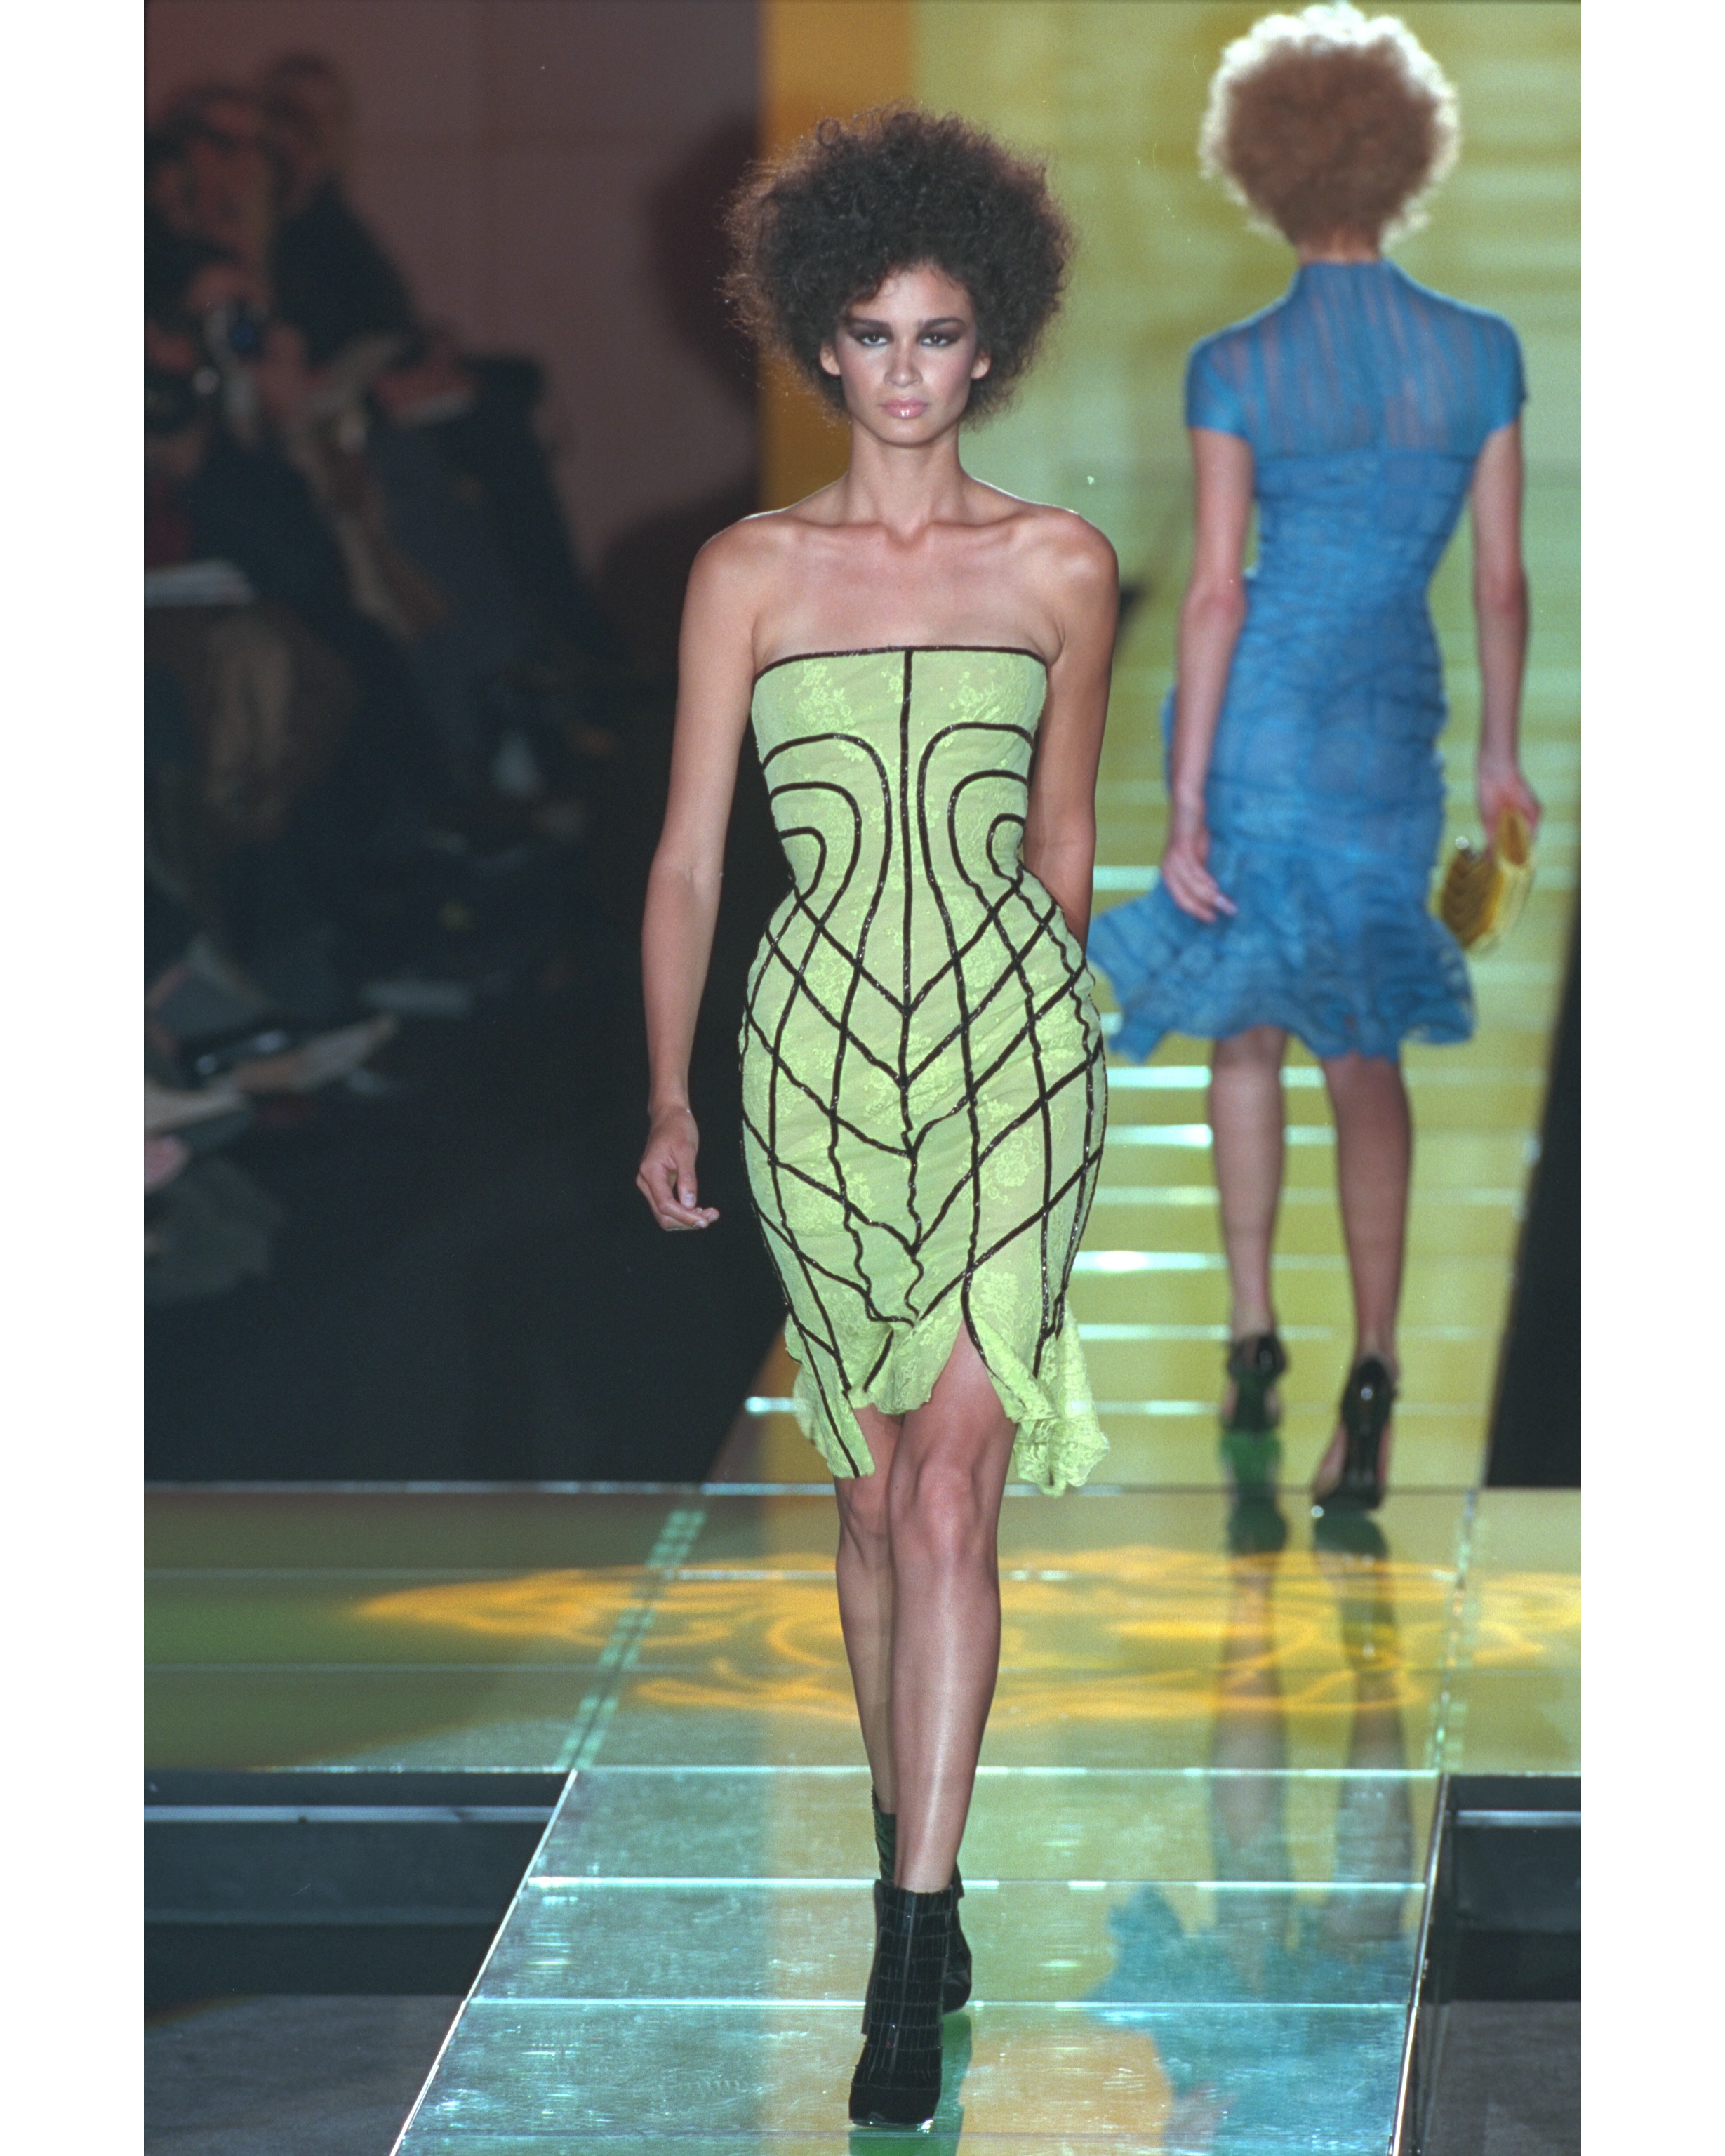 S/S 2001 Haute Couture Green and Black Geometric Embellished Dress